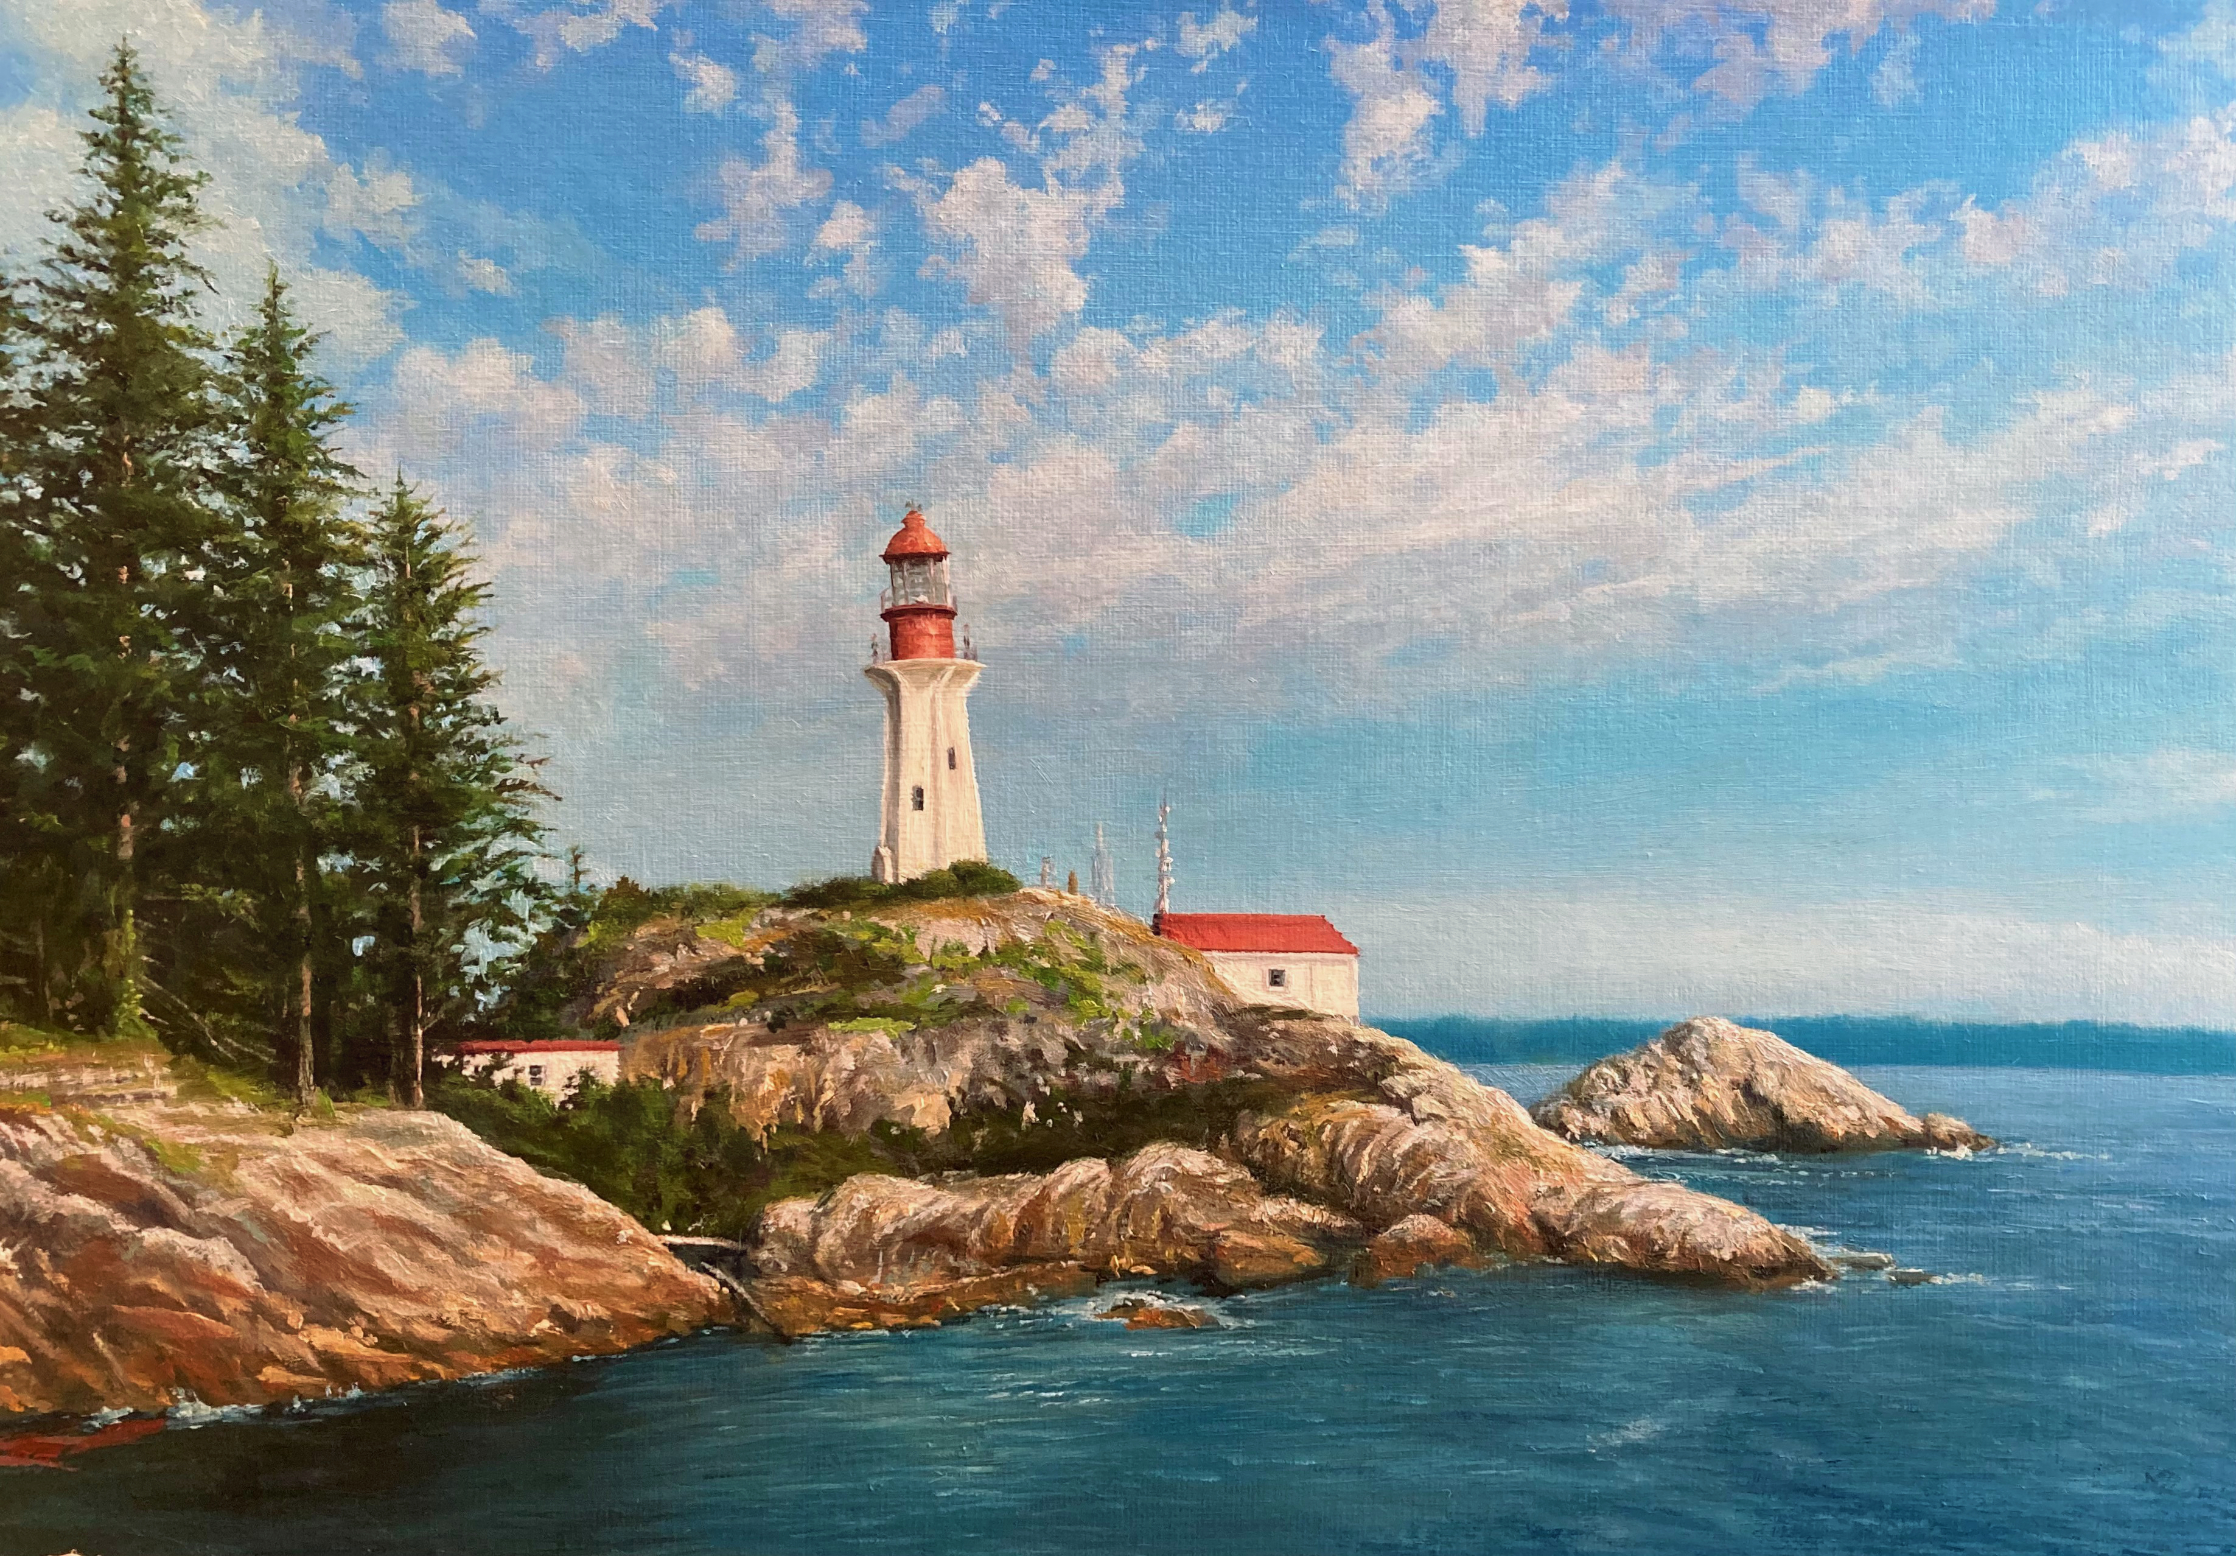 Light House Park, British Columbia - Oils on Canvas (12" x 16"), by Andrew Cunningham